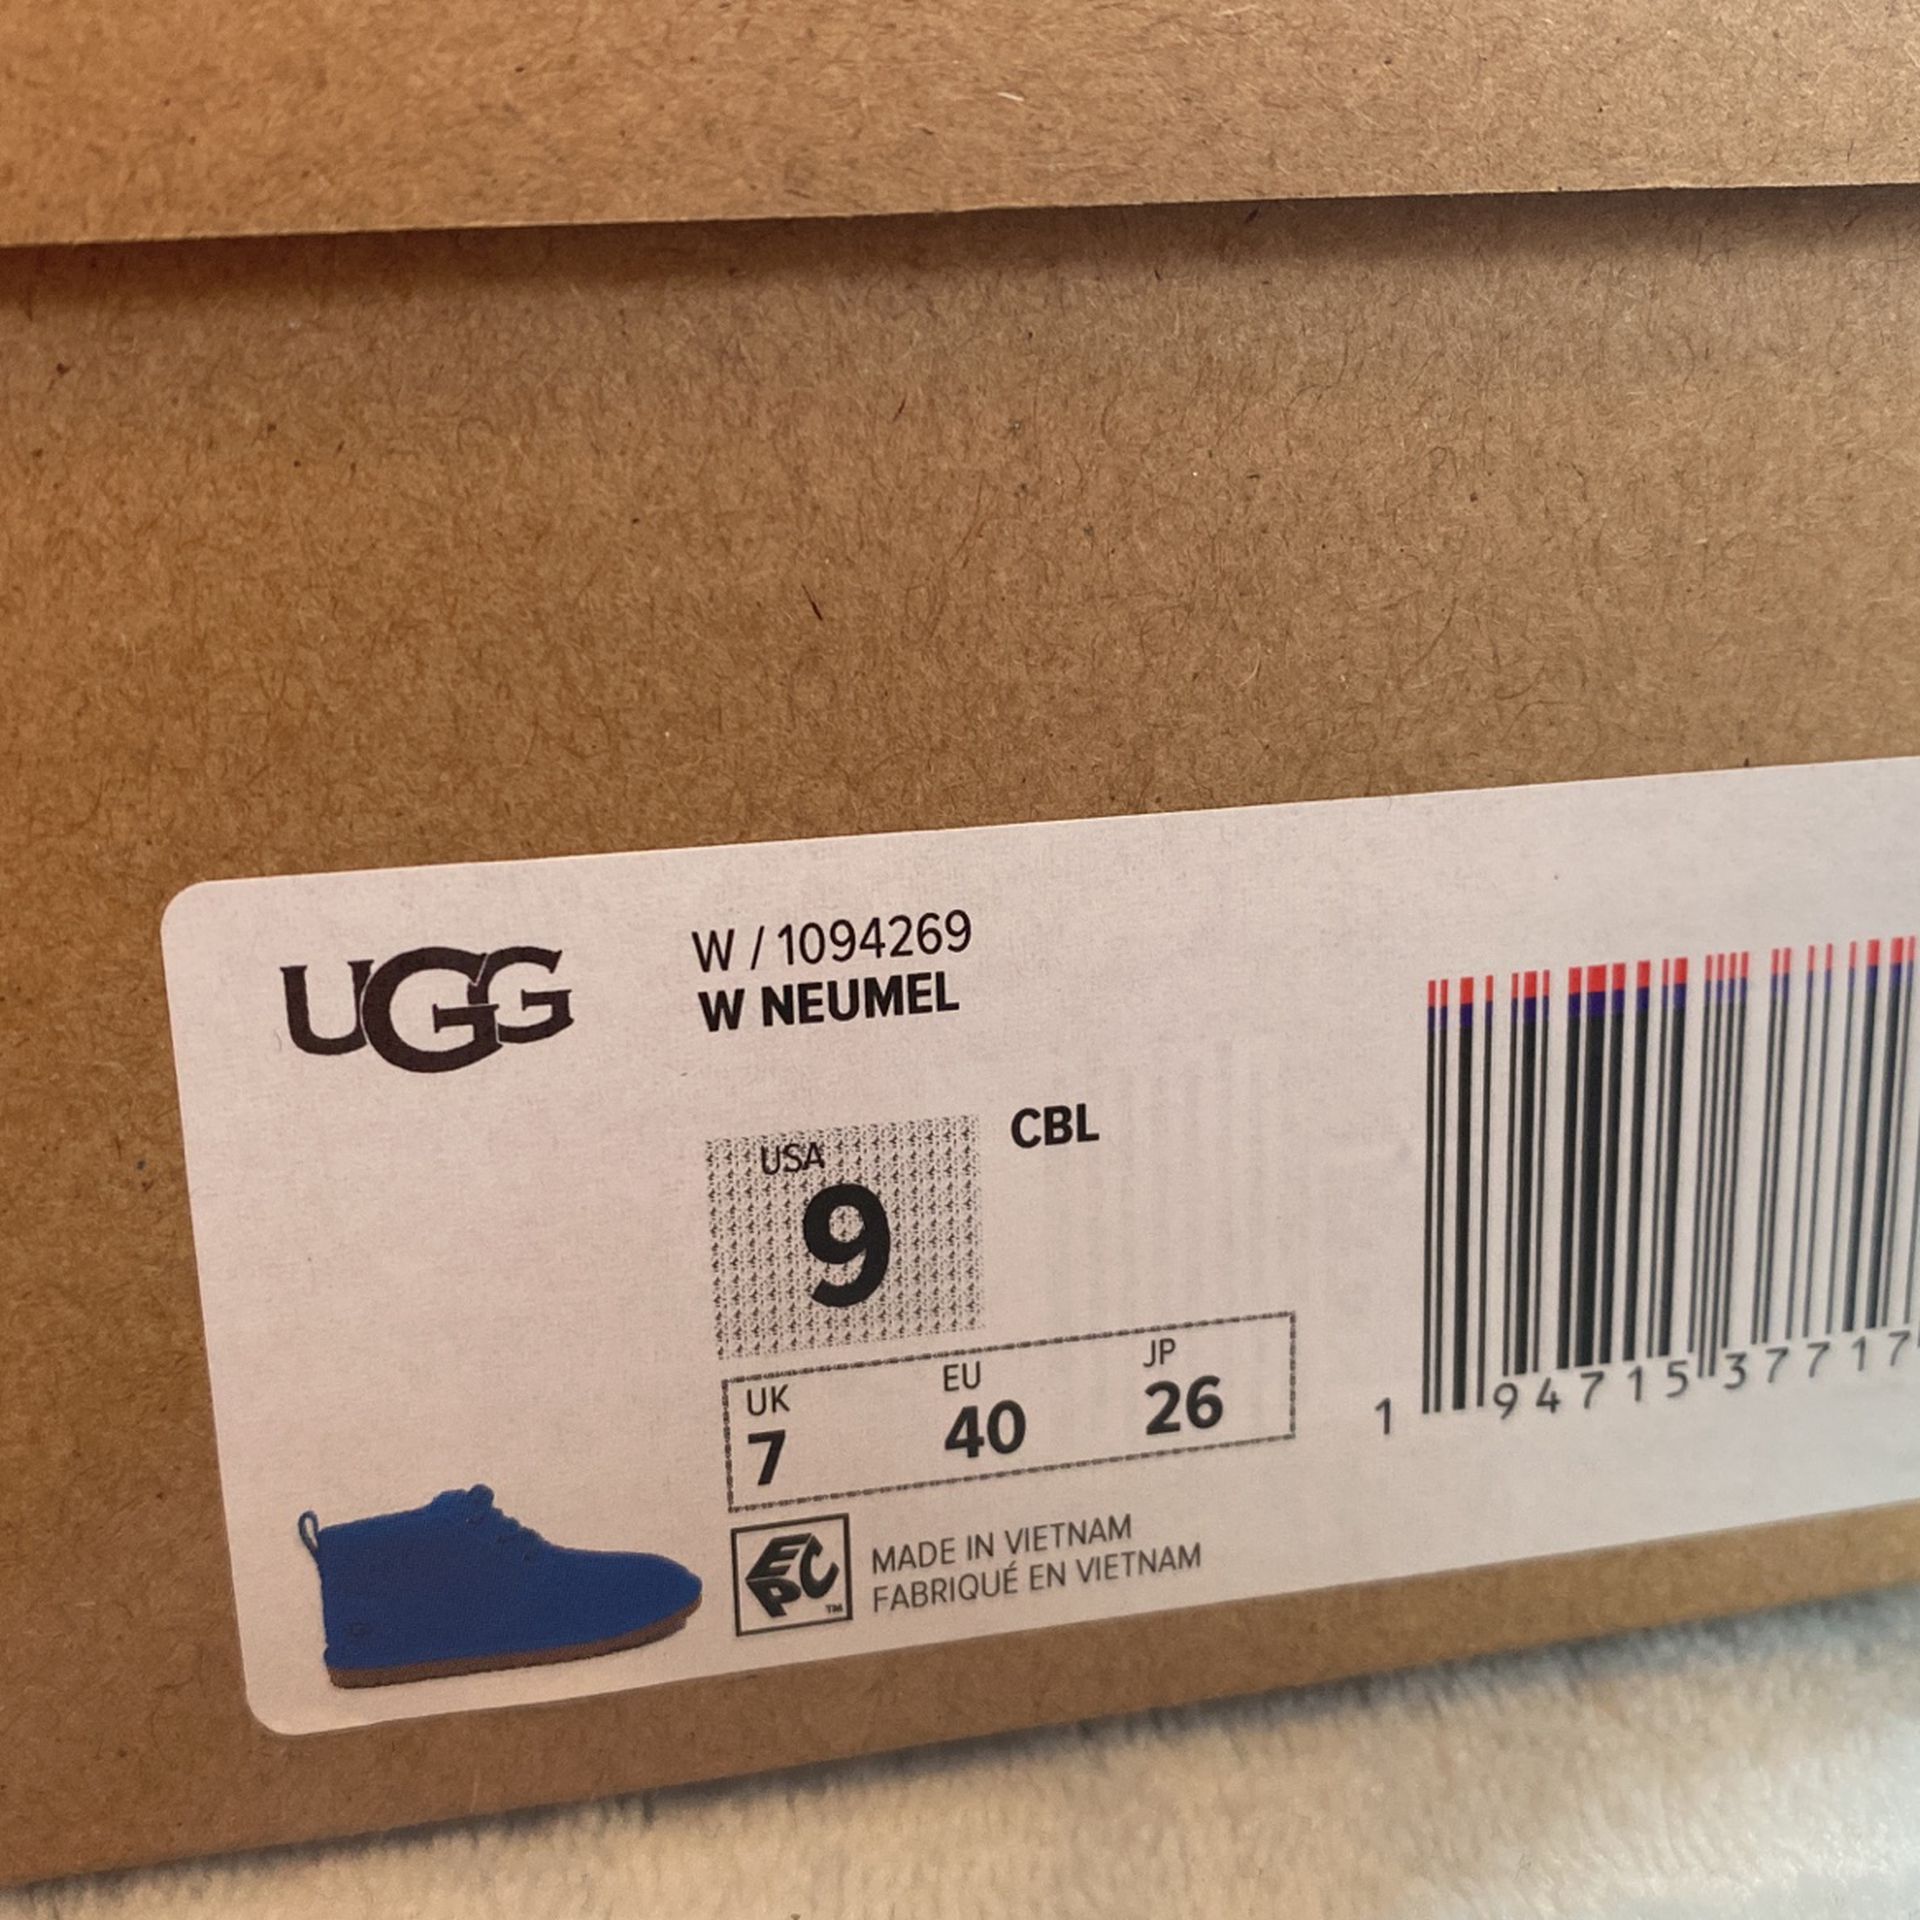 Womens UGG Boots